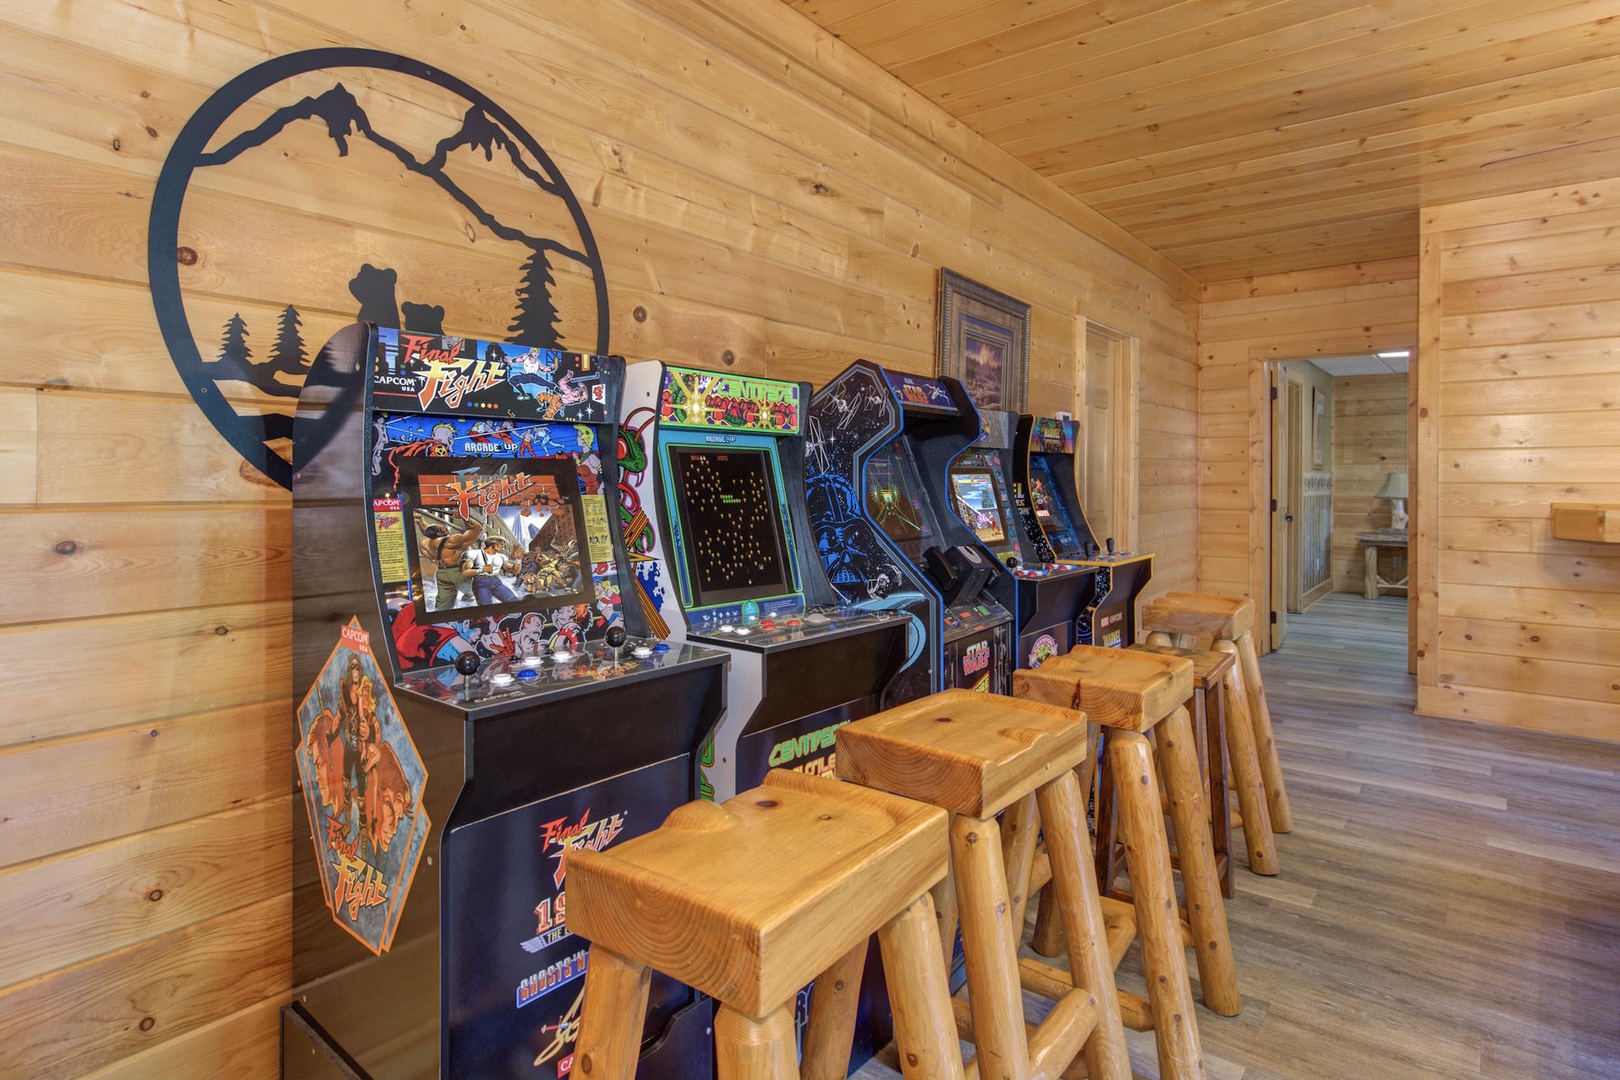 Arcade games in the game room